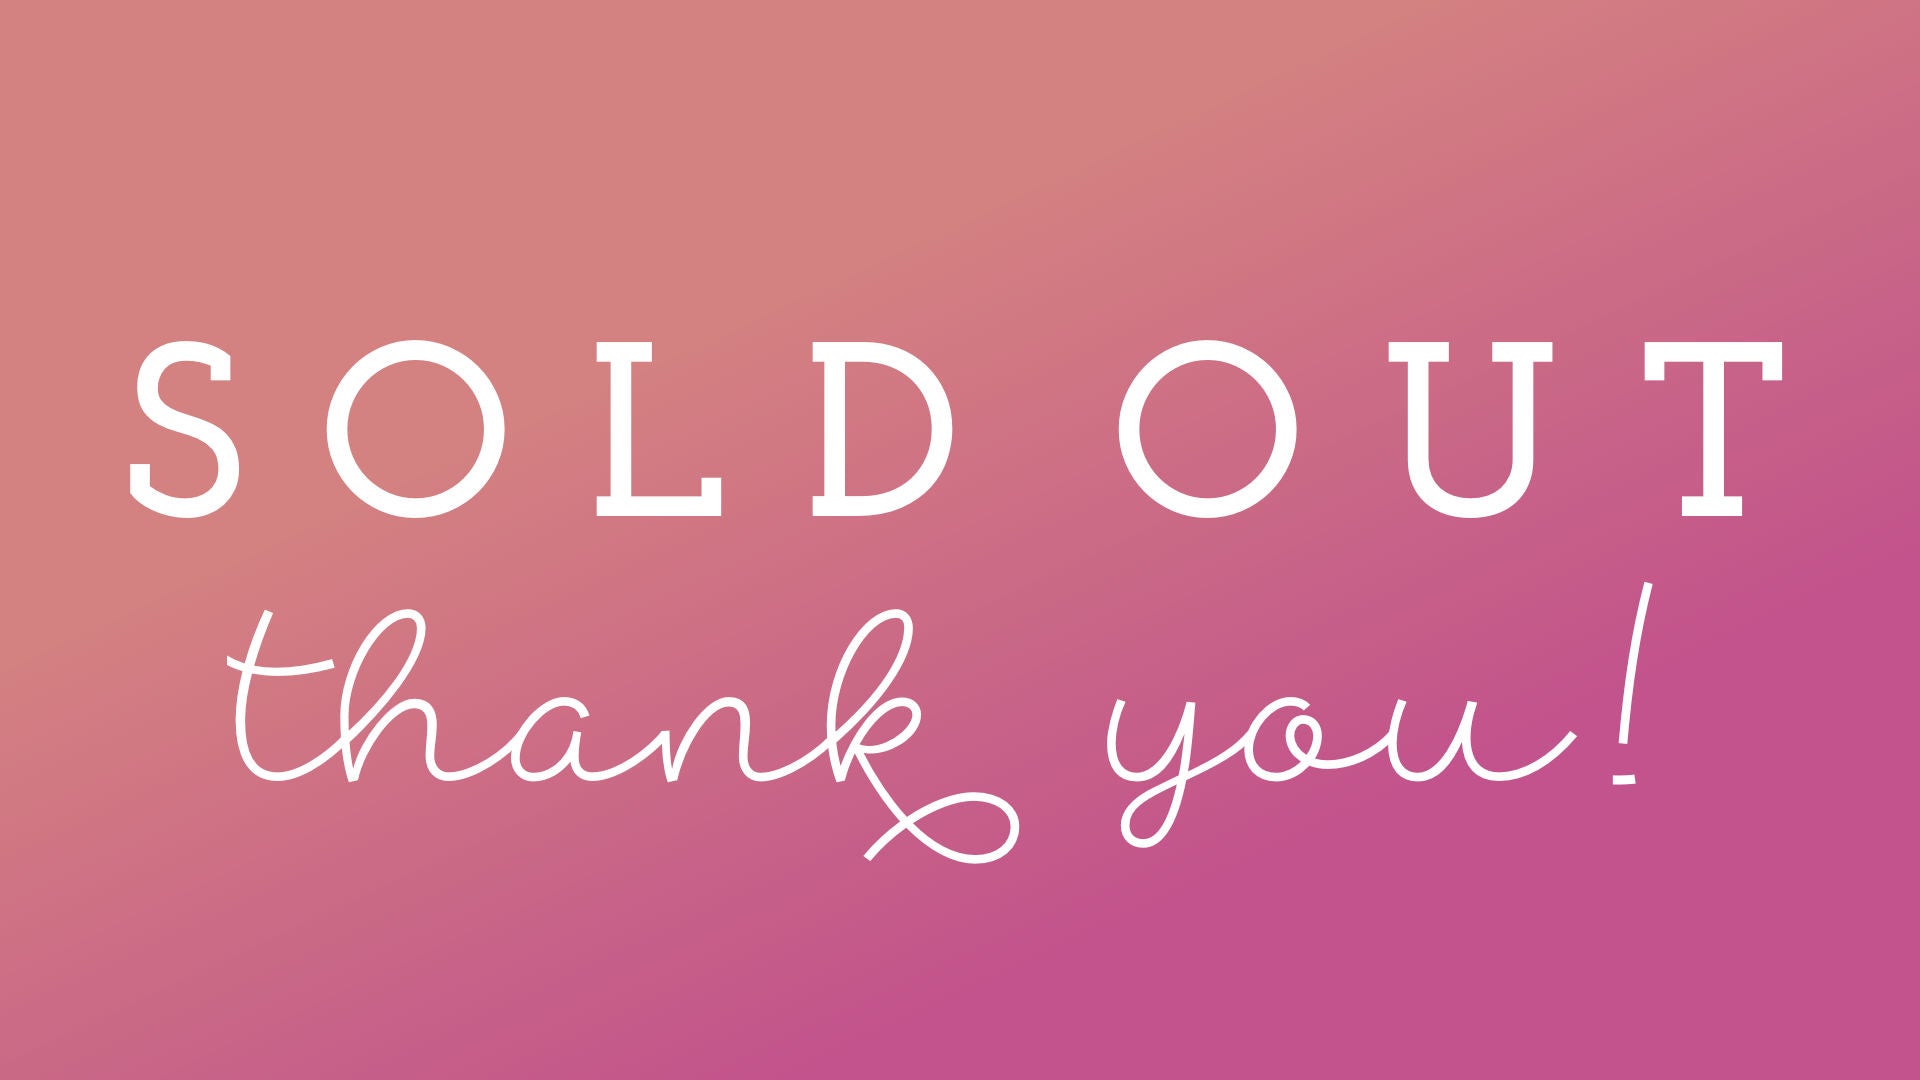 sold out！thank you♡ | www.gamutgallerympls.com